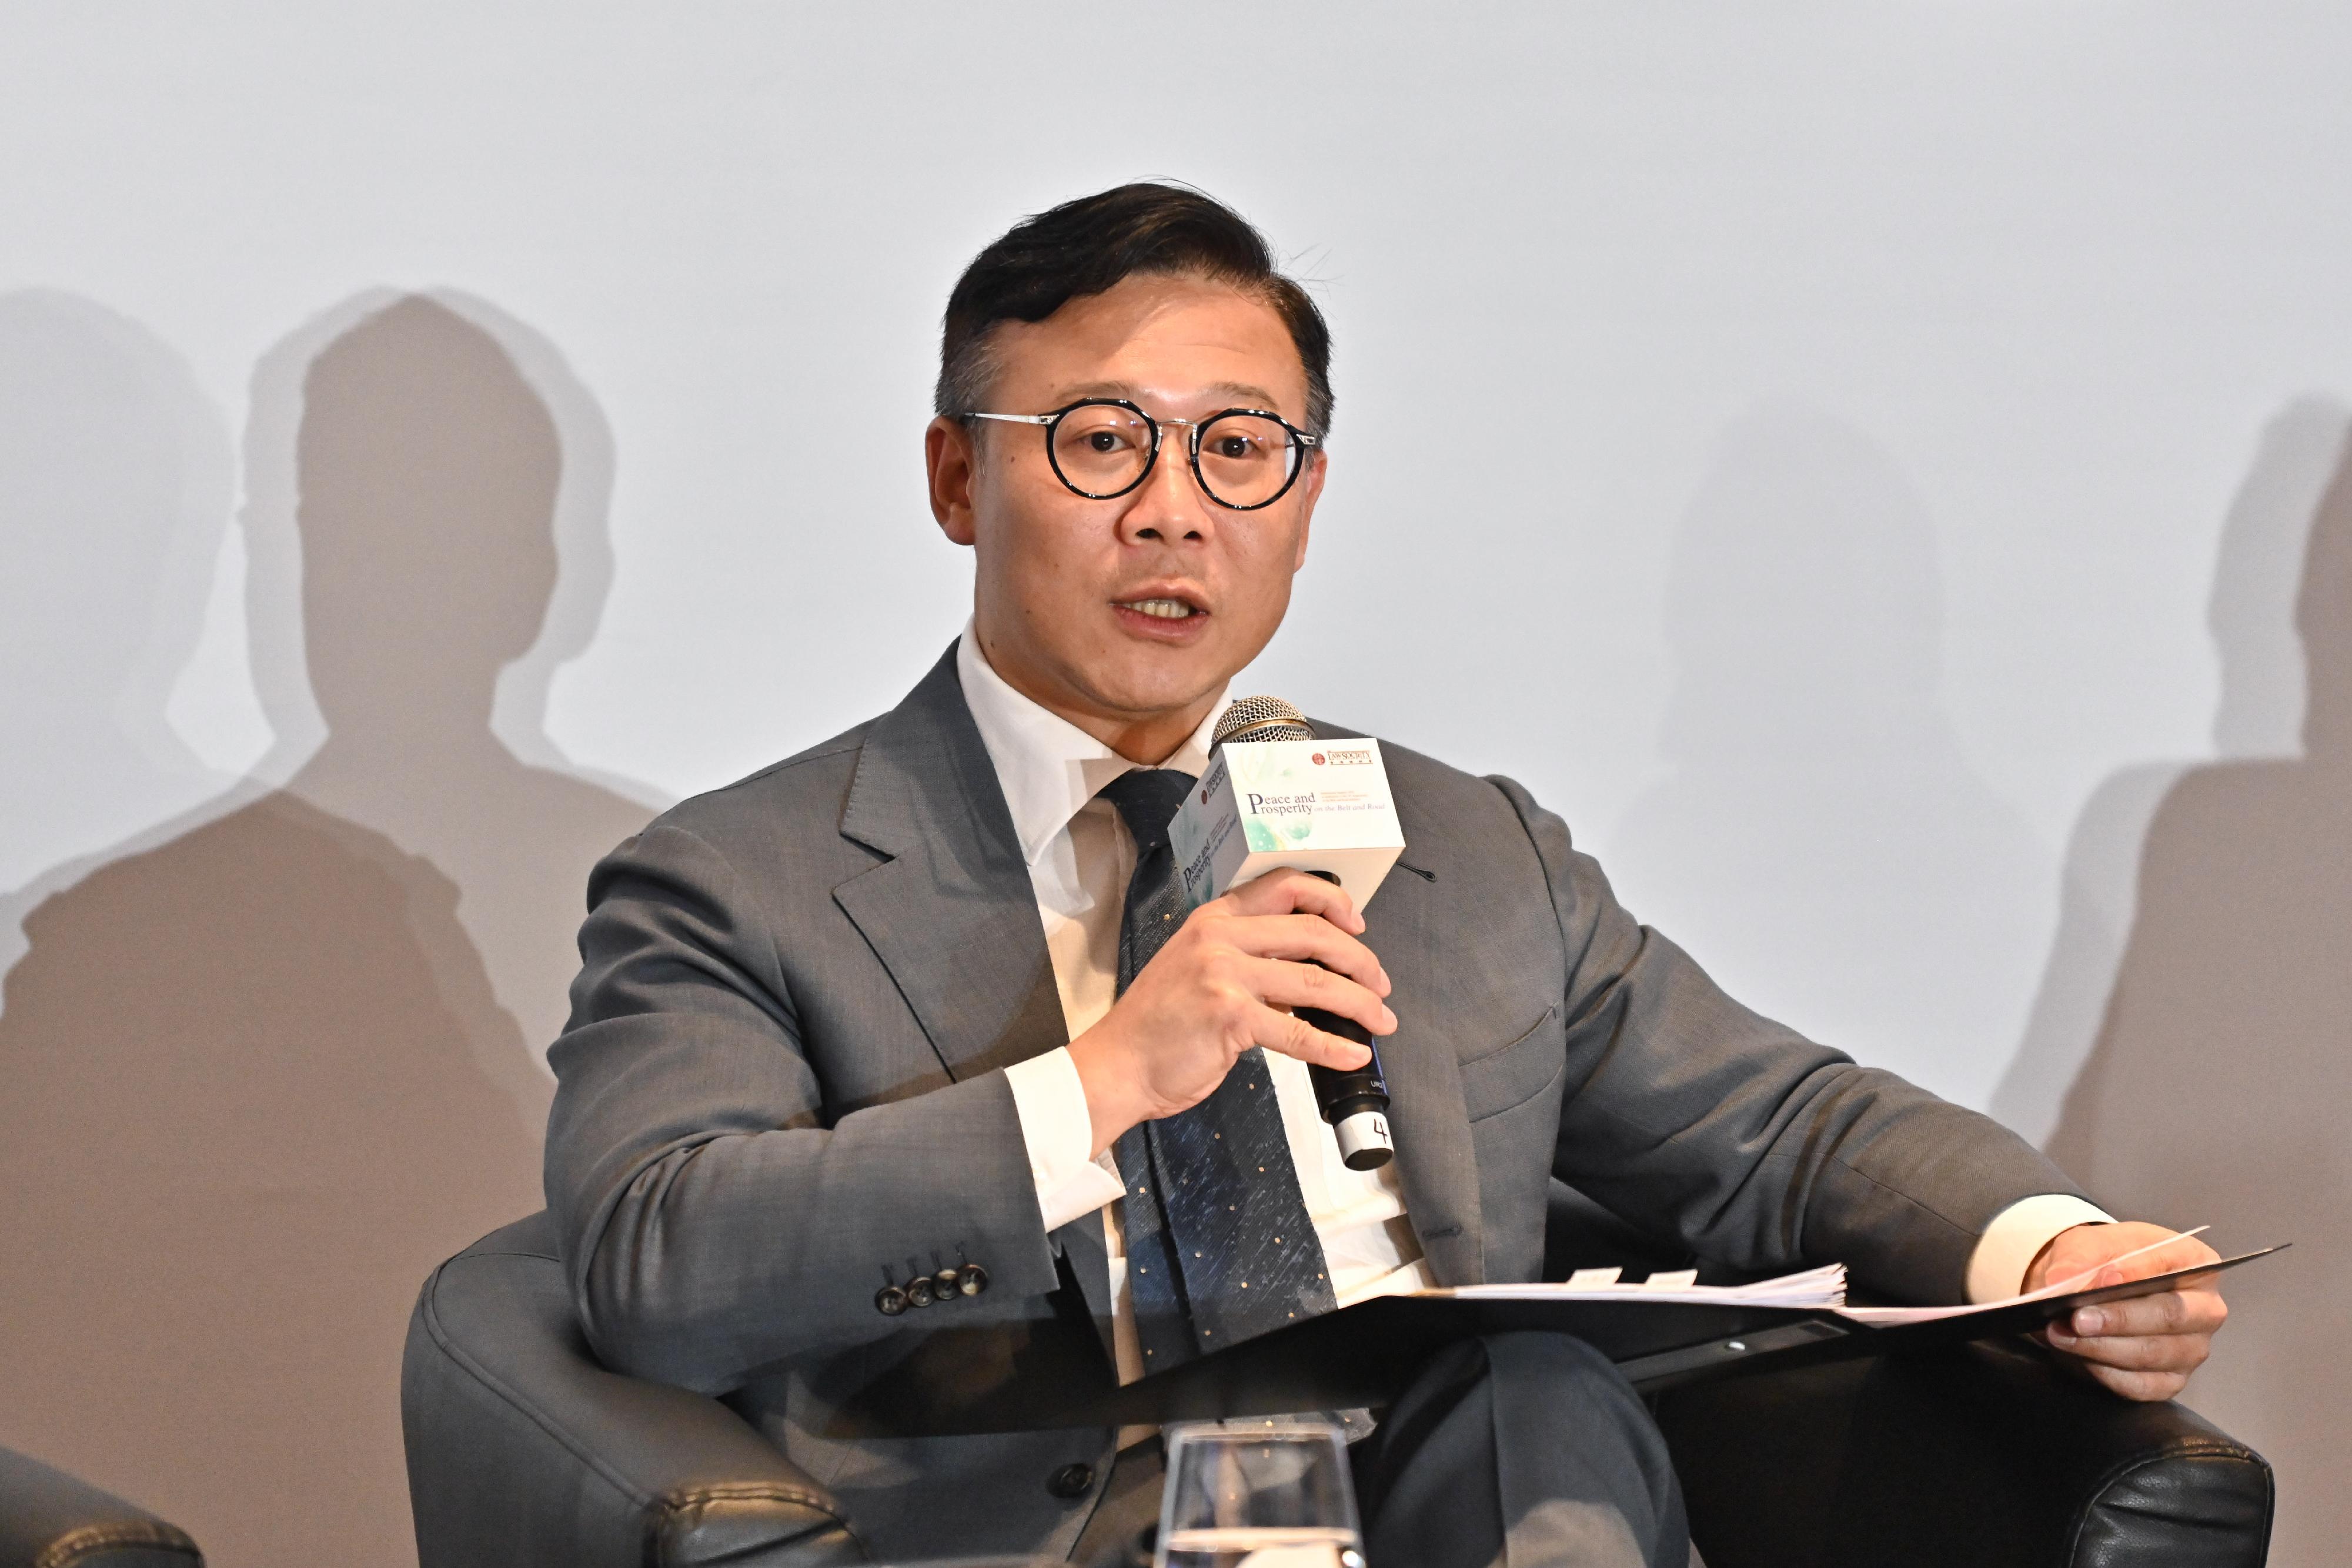 The Deputy Secretary for Justice, Mr Cheung Kwok-kwan, speaks at the Law Society of Hong Kong's International Summit 2023 in celebration of the 10th Anniversary of the Belt and Road Initiative today (October 11).

